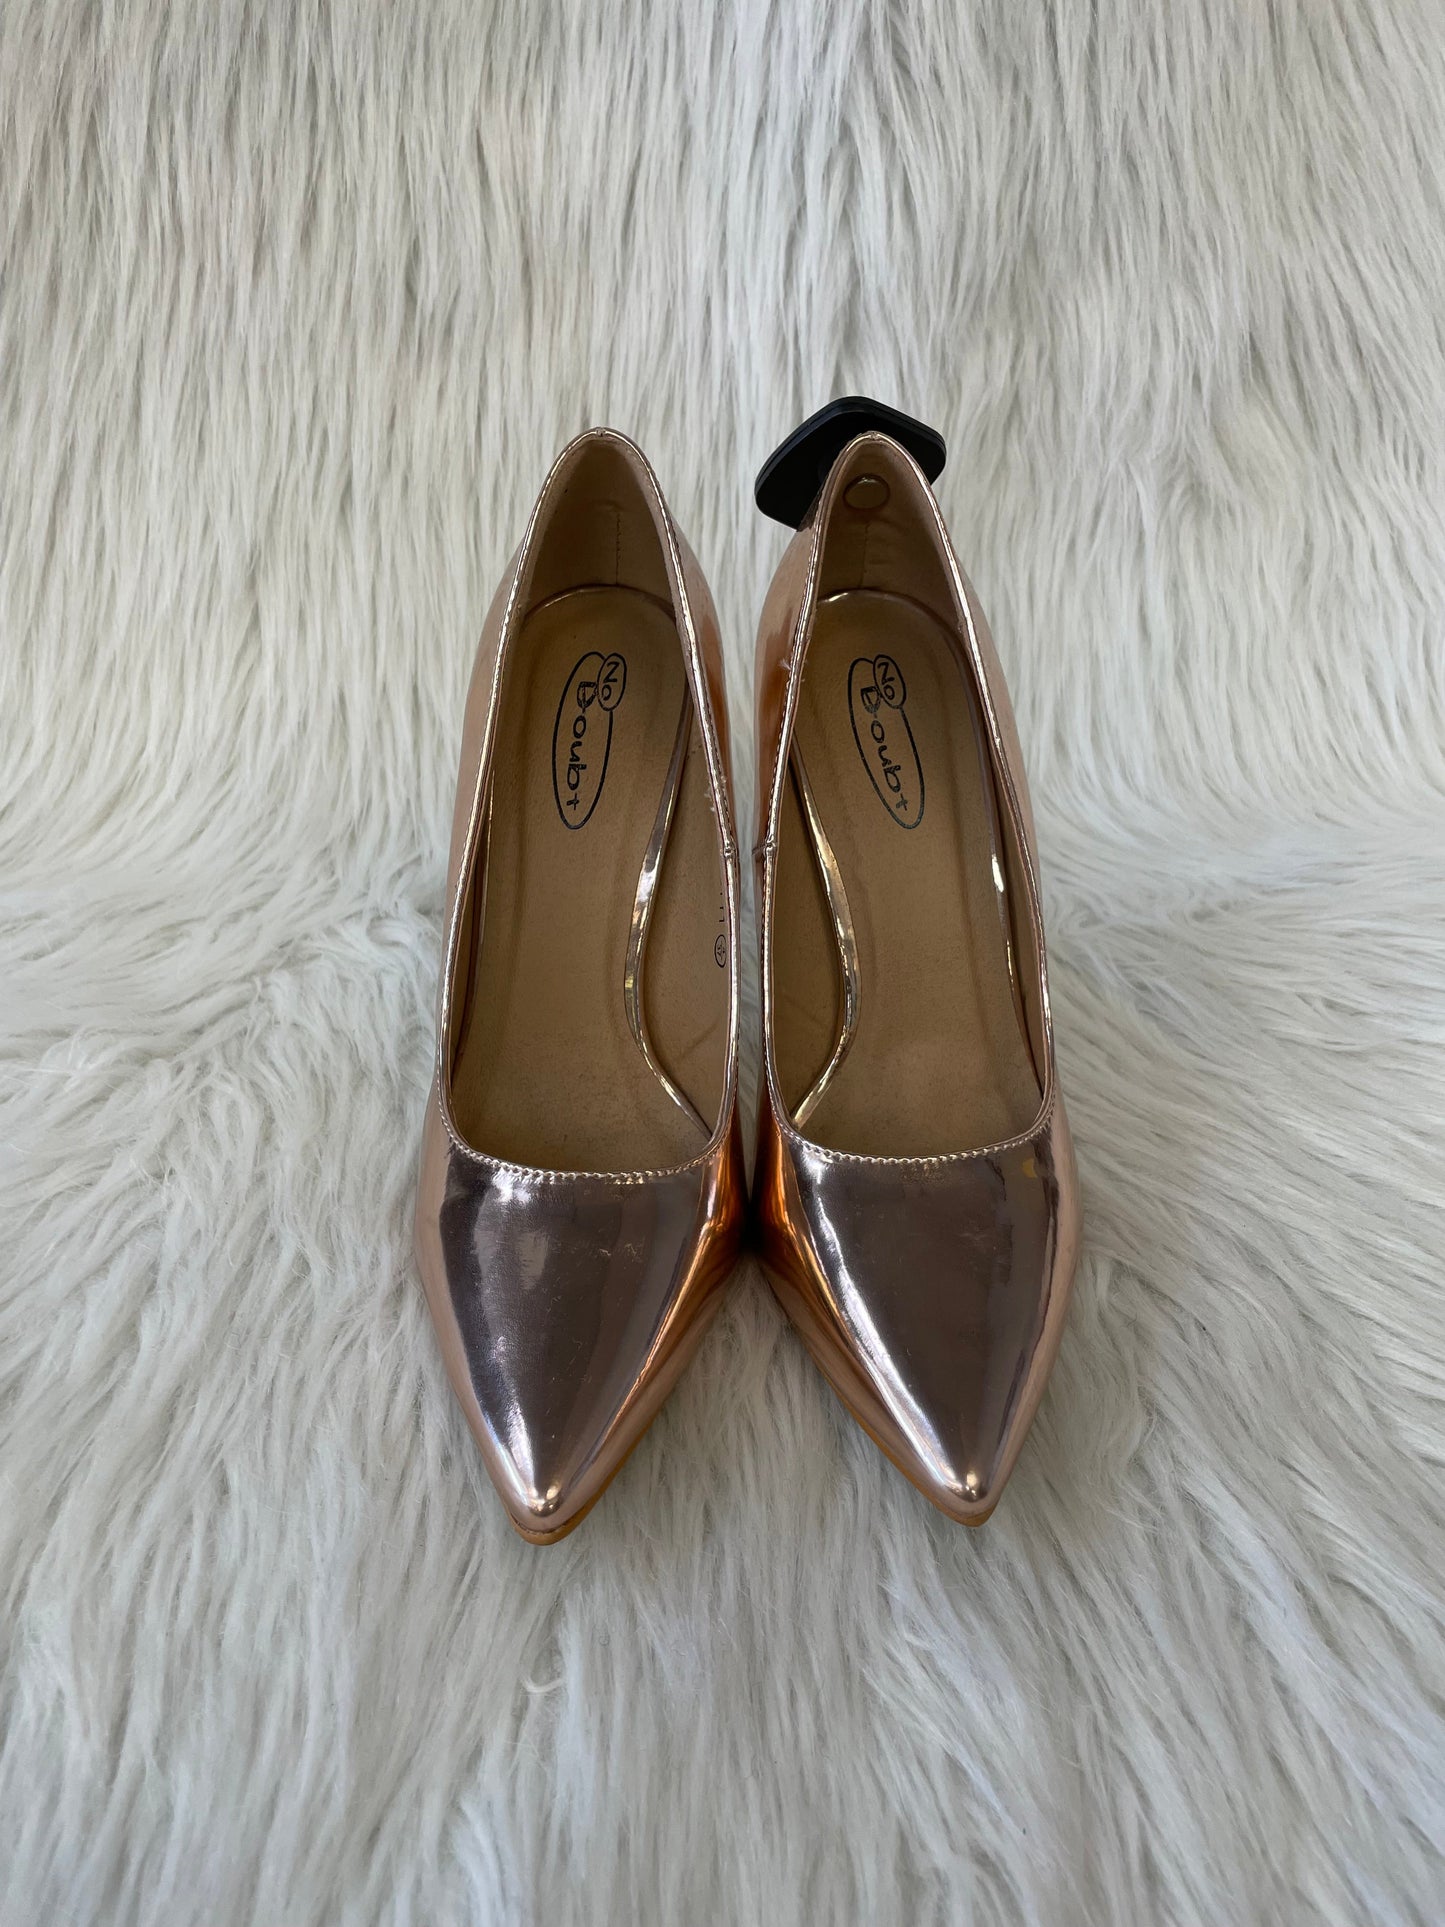 Rose Gold Shoes Heels Stiletto Clothes Mentor, Size 6.5